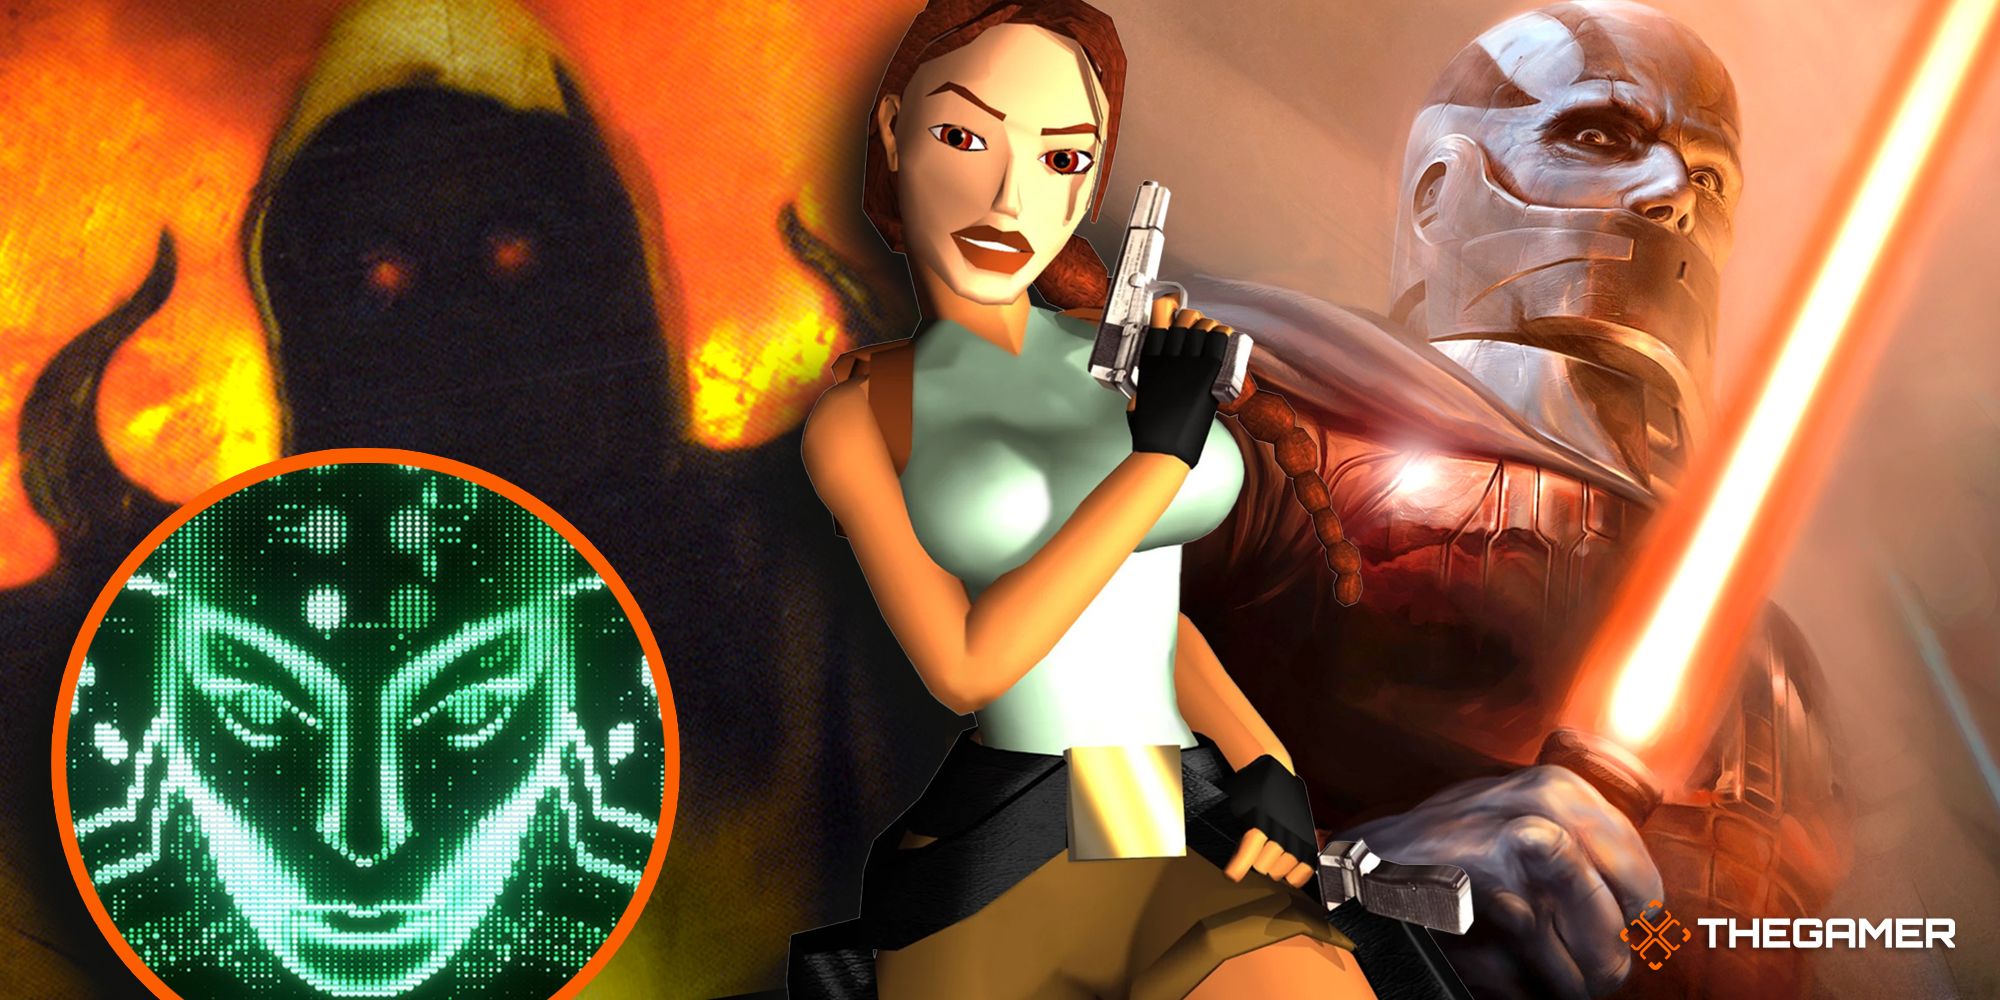 14-Tomb Raider 2-Hexen-System Shock and KOTOR